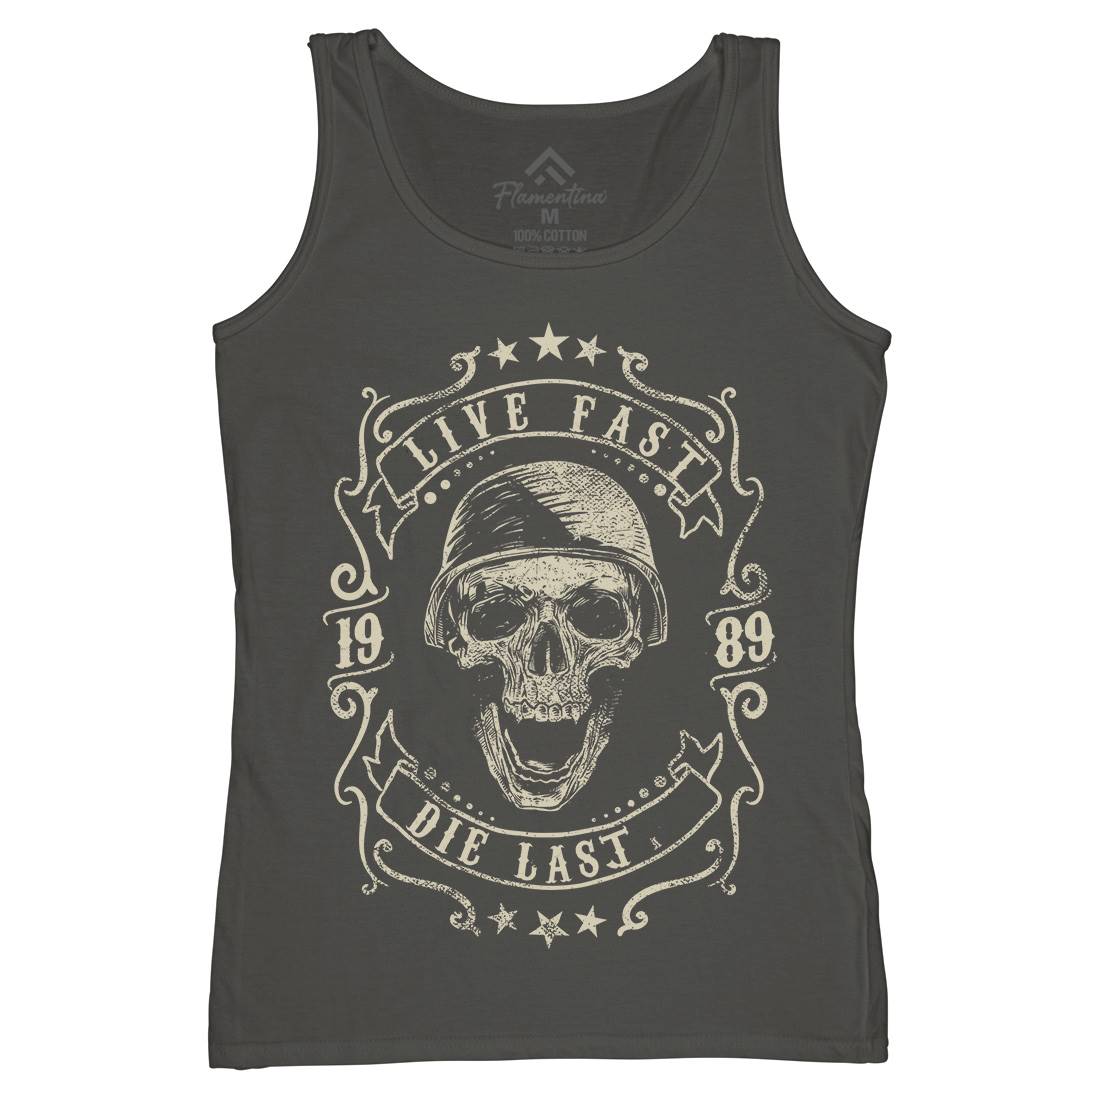 Live Fast Womens Organic Tank Top Vest Motorcycles C961